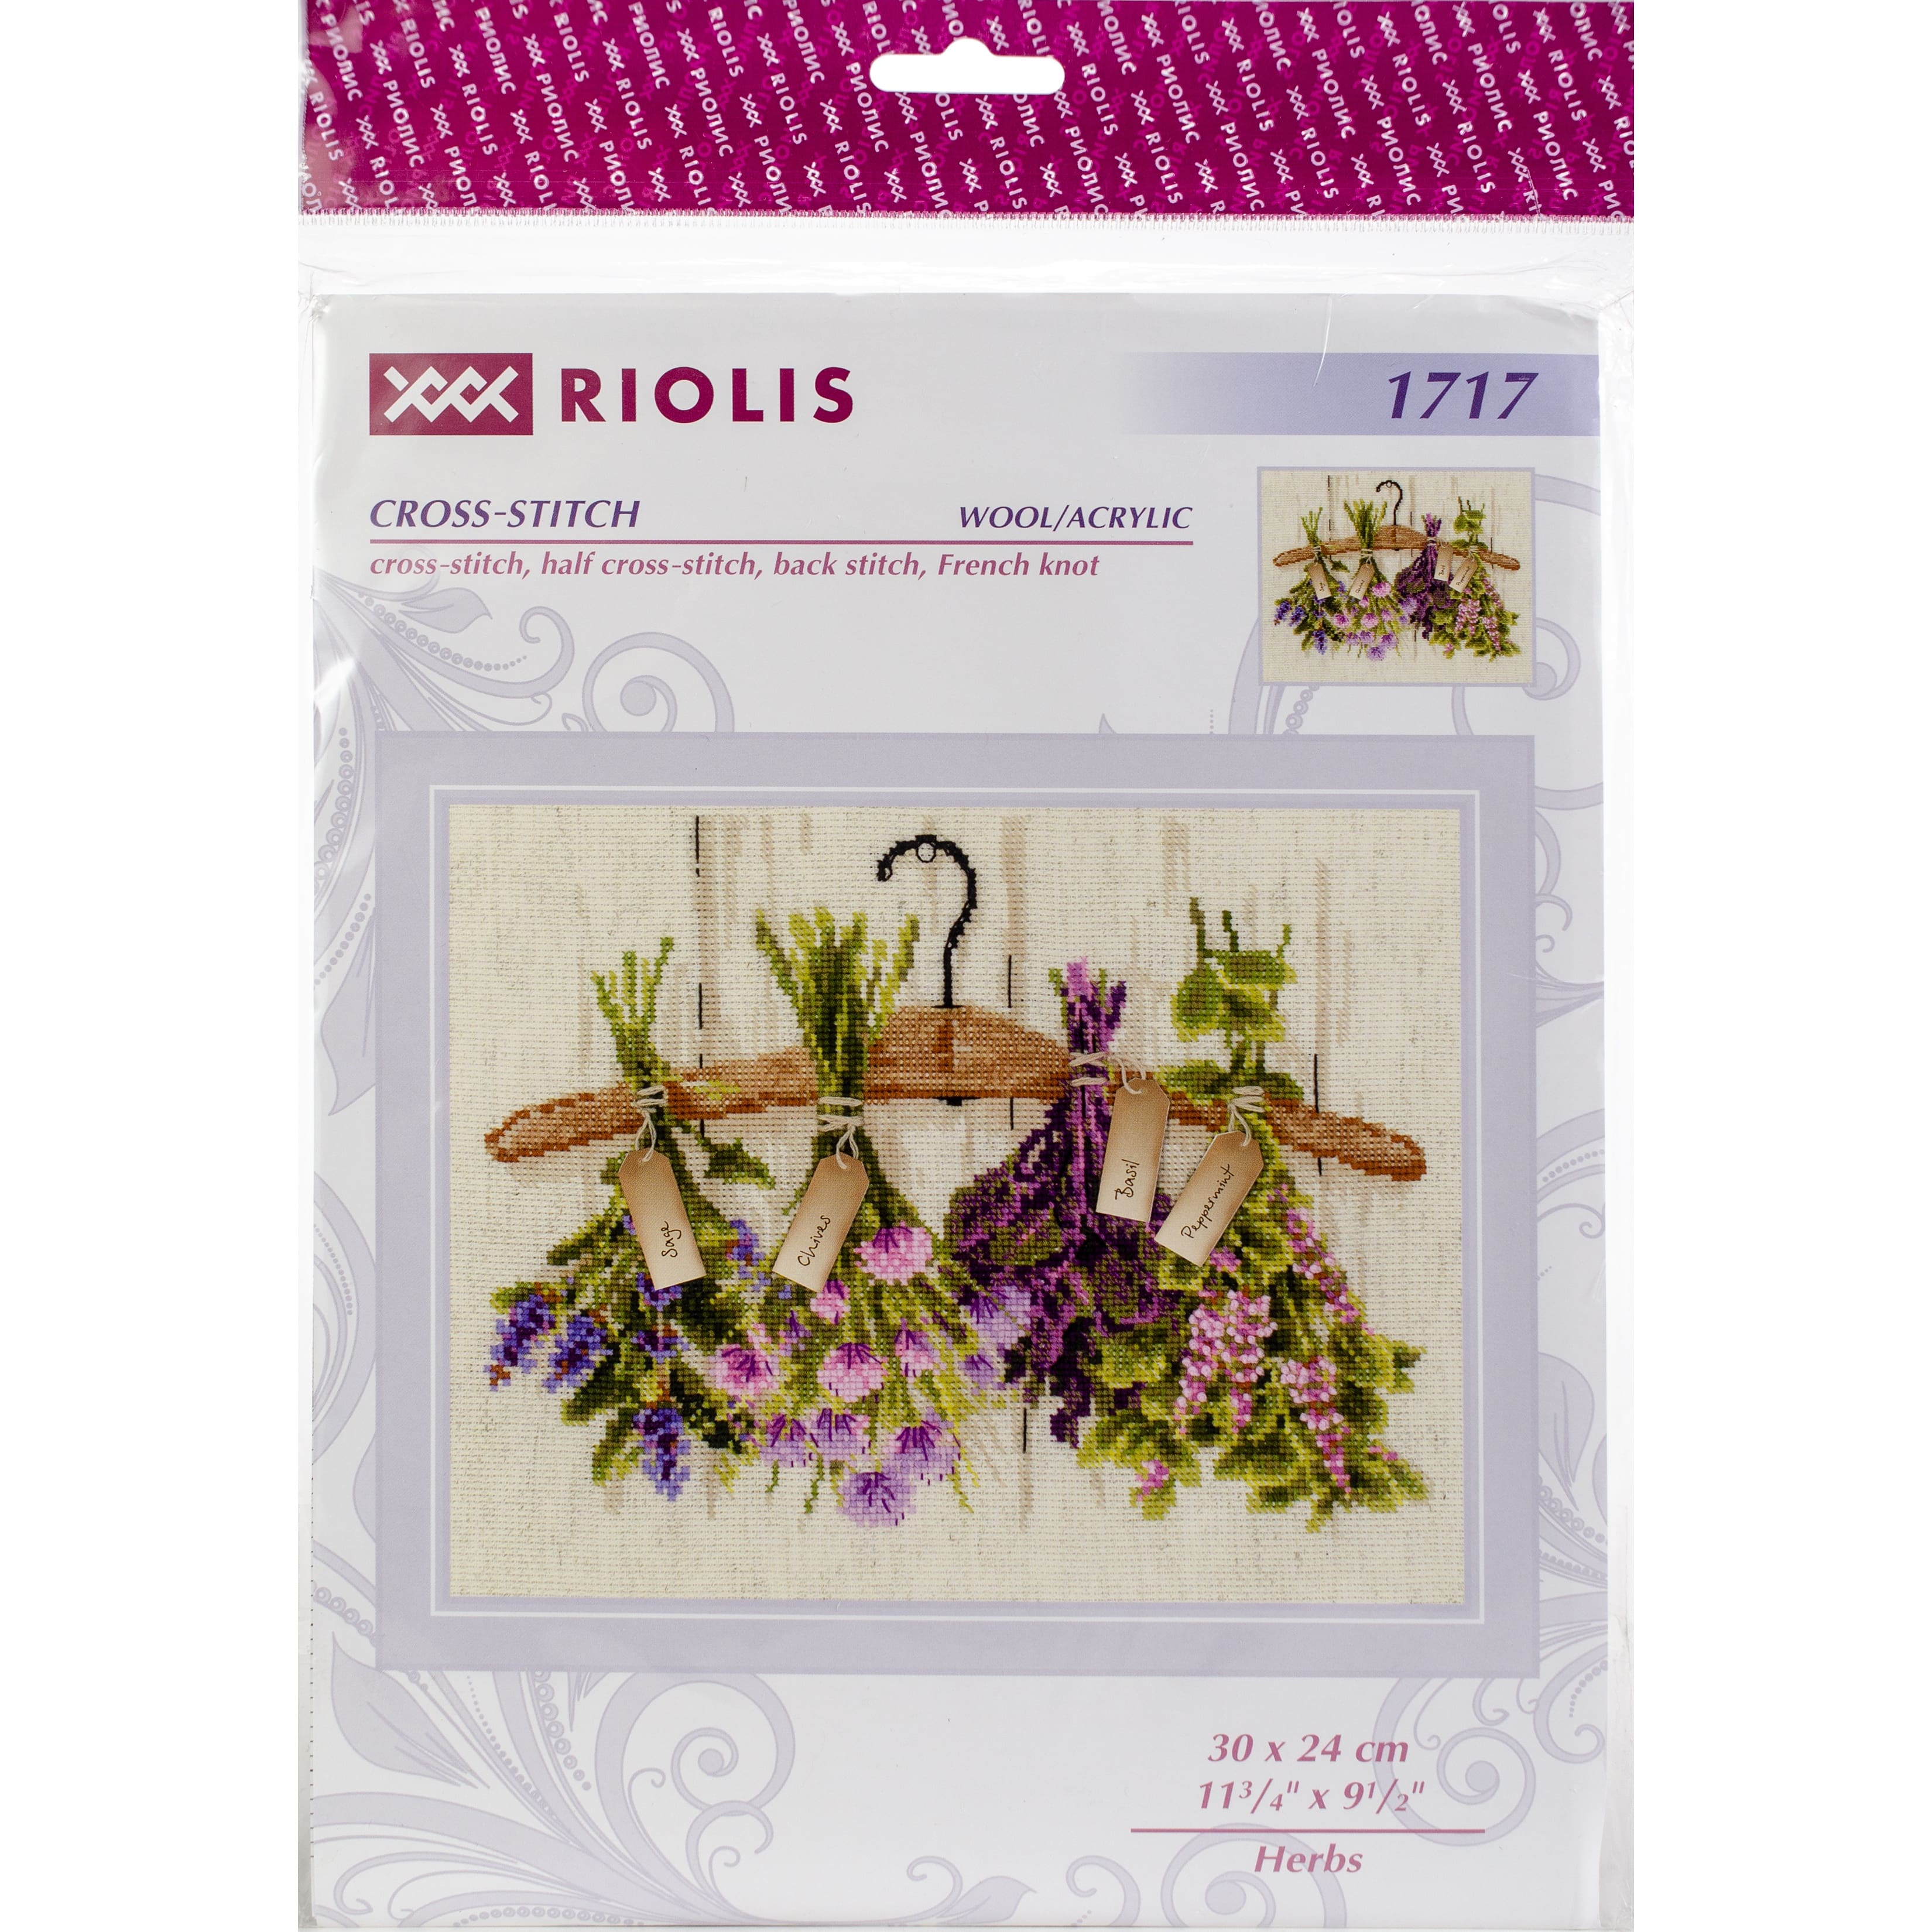 RIOLIS Herbs Counted Cross Stitch Kit